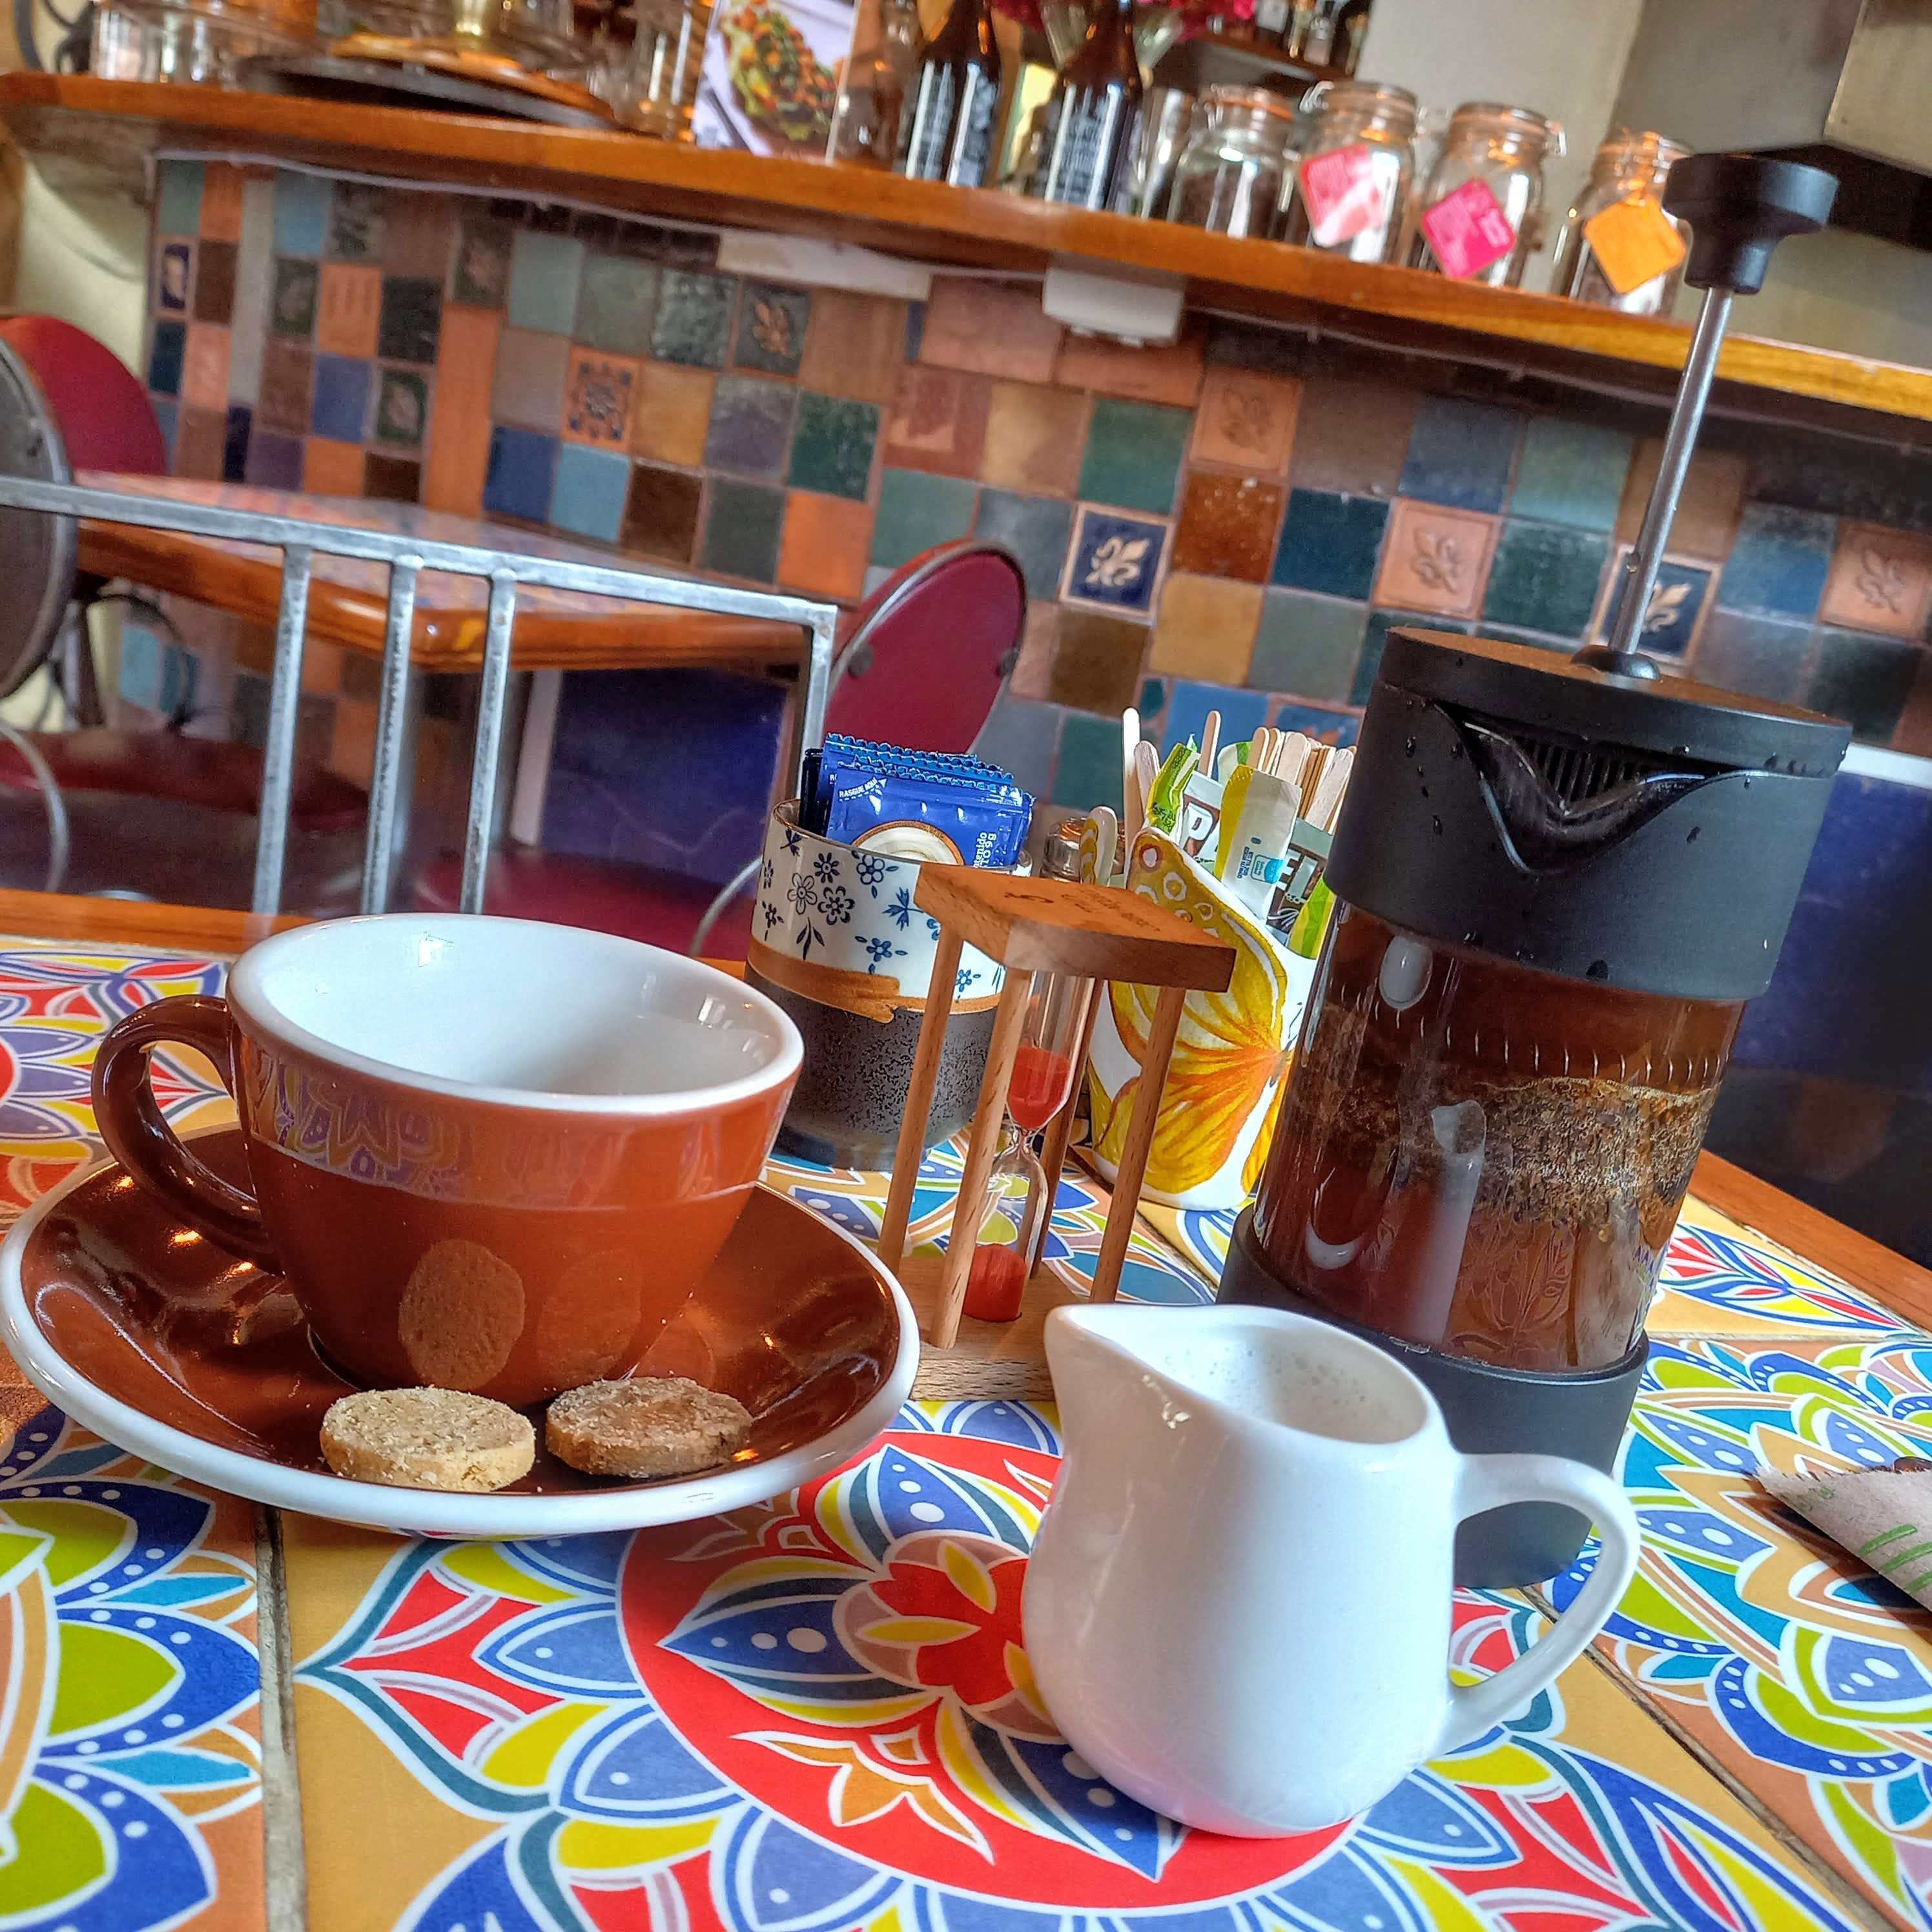 brown coffee cup next to a french press filled with black coffee and a white cream container on a colorful table cloth with colorful tile in the background